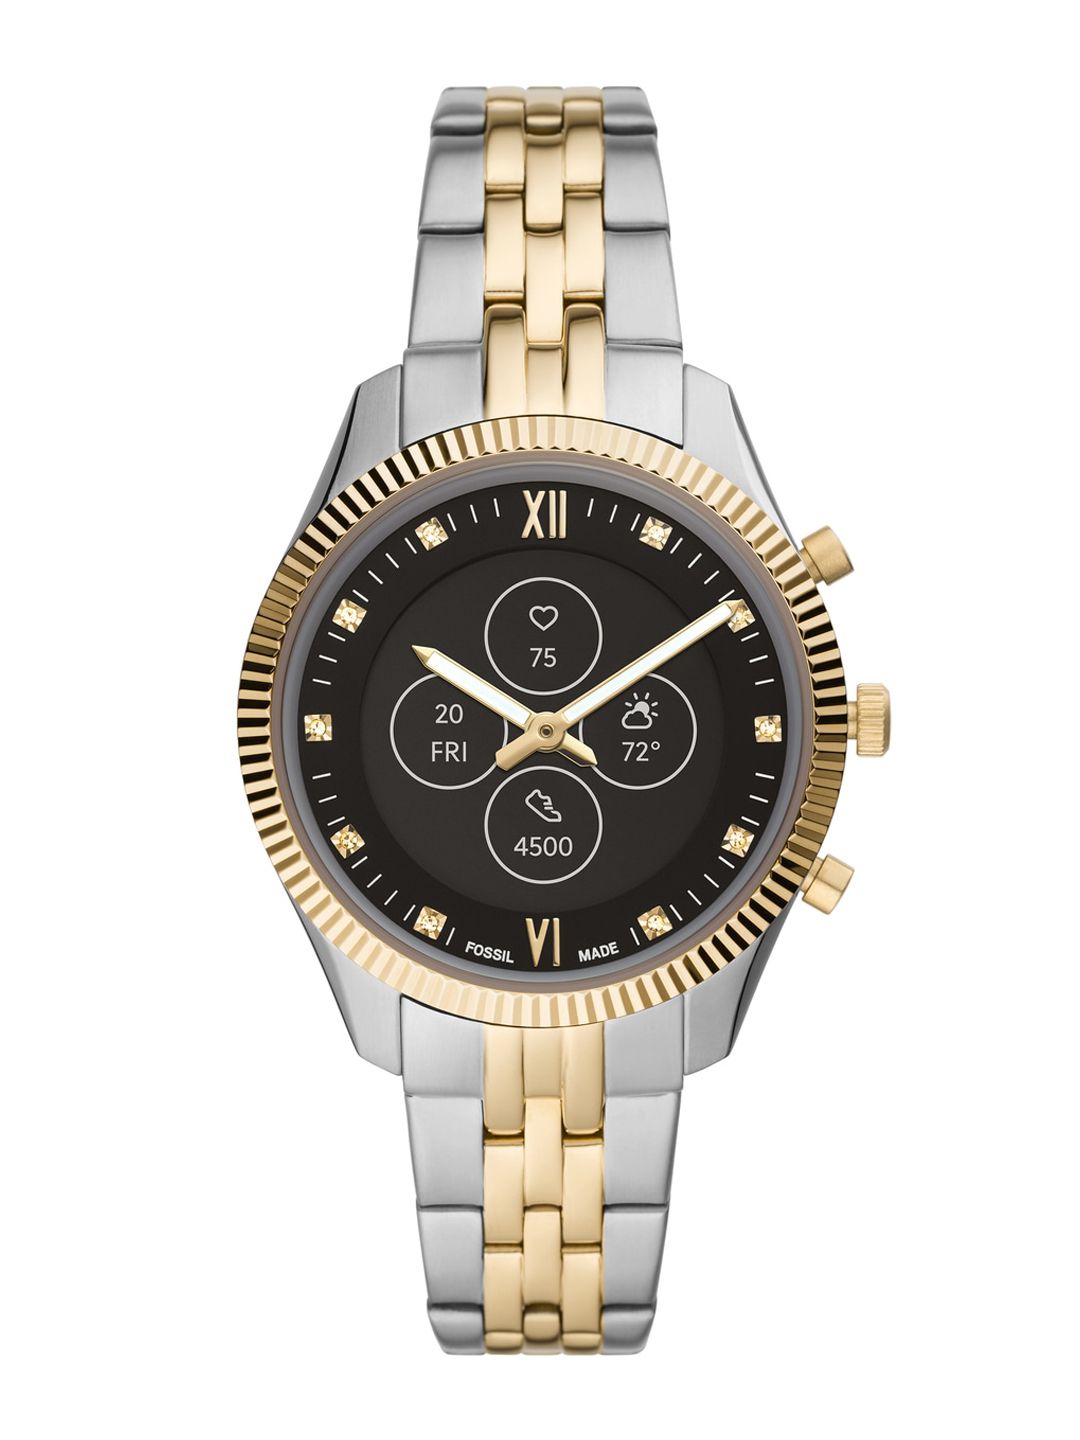 Fossil Women Silver & Gold-Toned Scarlette Hybrid HR Two-Tone Smartwatch FTW7042 Price in India